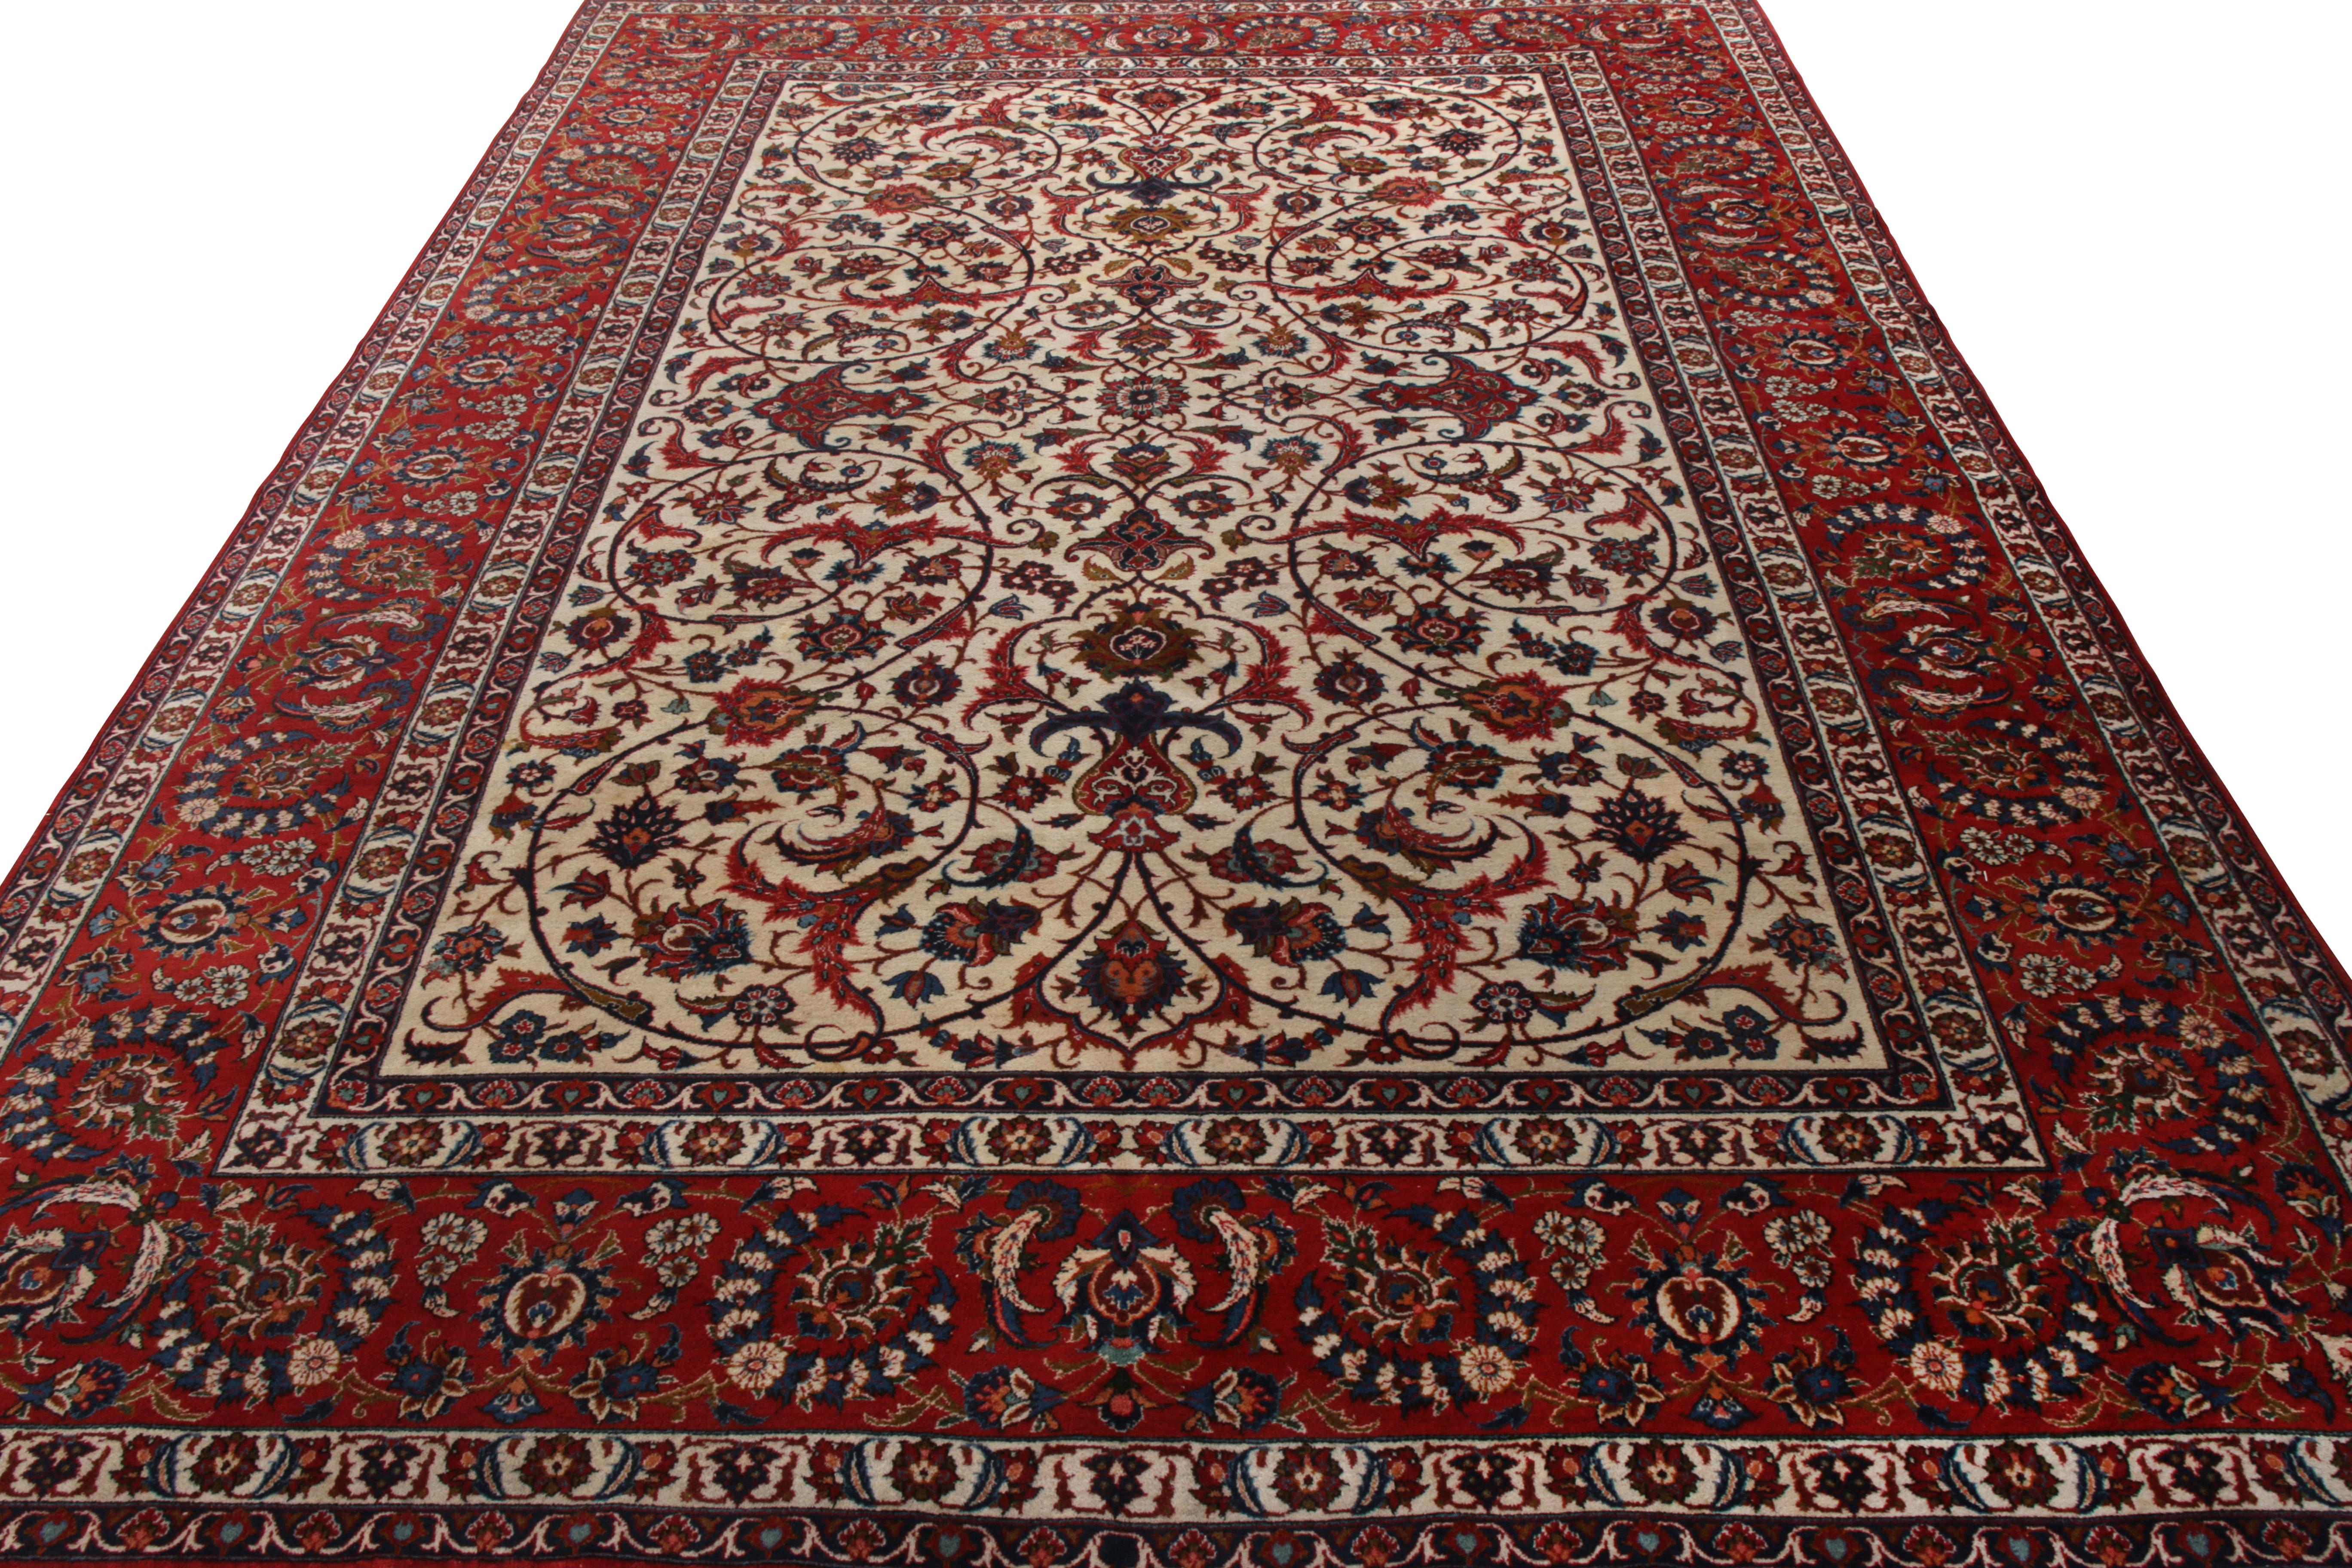 Exemplifying the Persian aesthetic sensibilities of the 1950s, this hand-knotted 10x14 mid-century Isfahani rug joins Rug & Kilim’s Antique & Vintage collection. The rug witnesses a spectacle of floral patterns in rich hues of red and beige, with